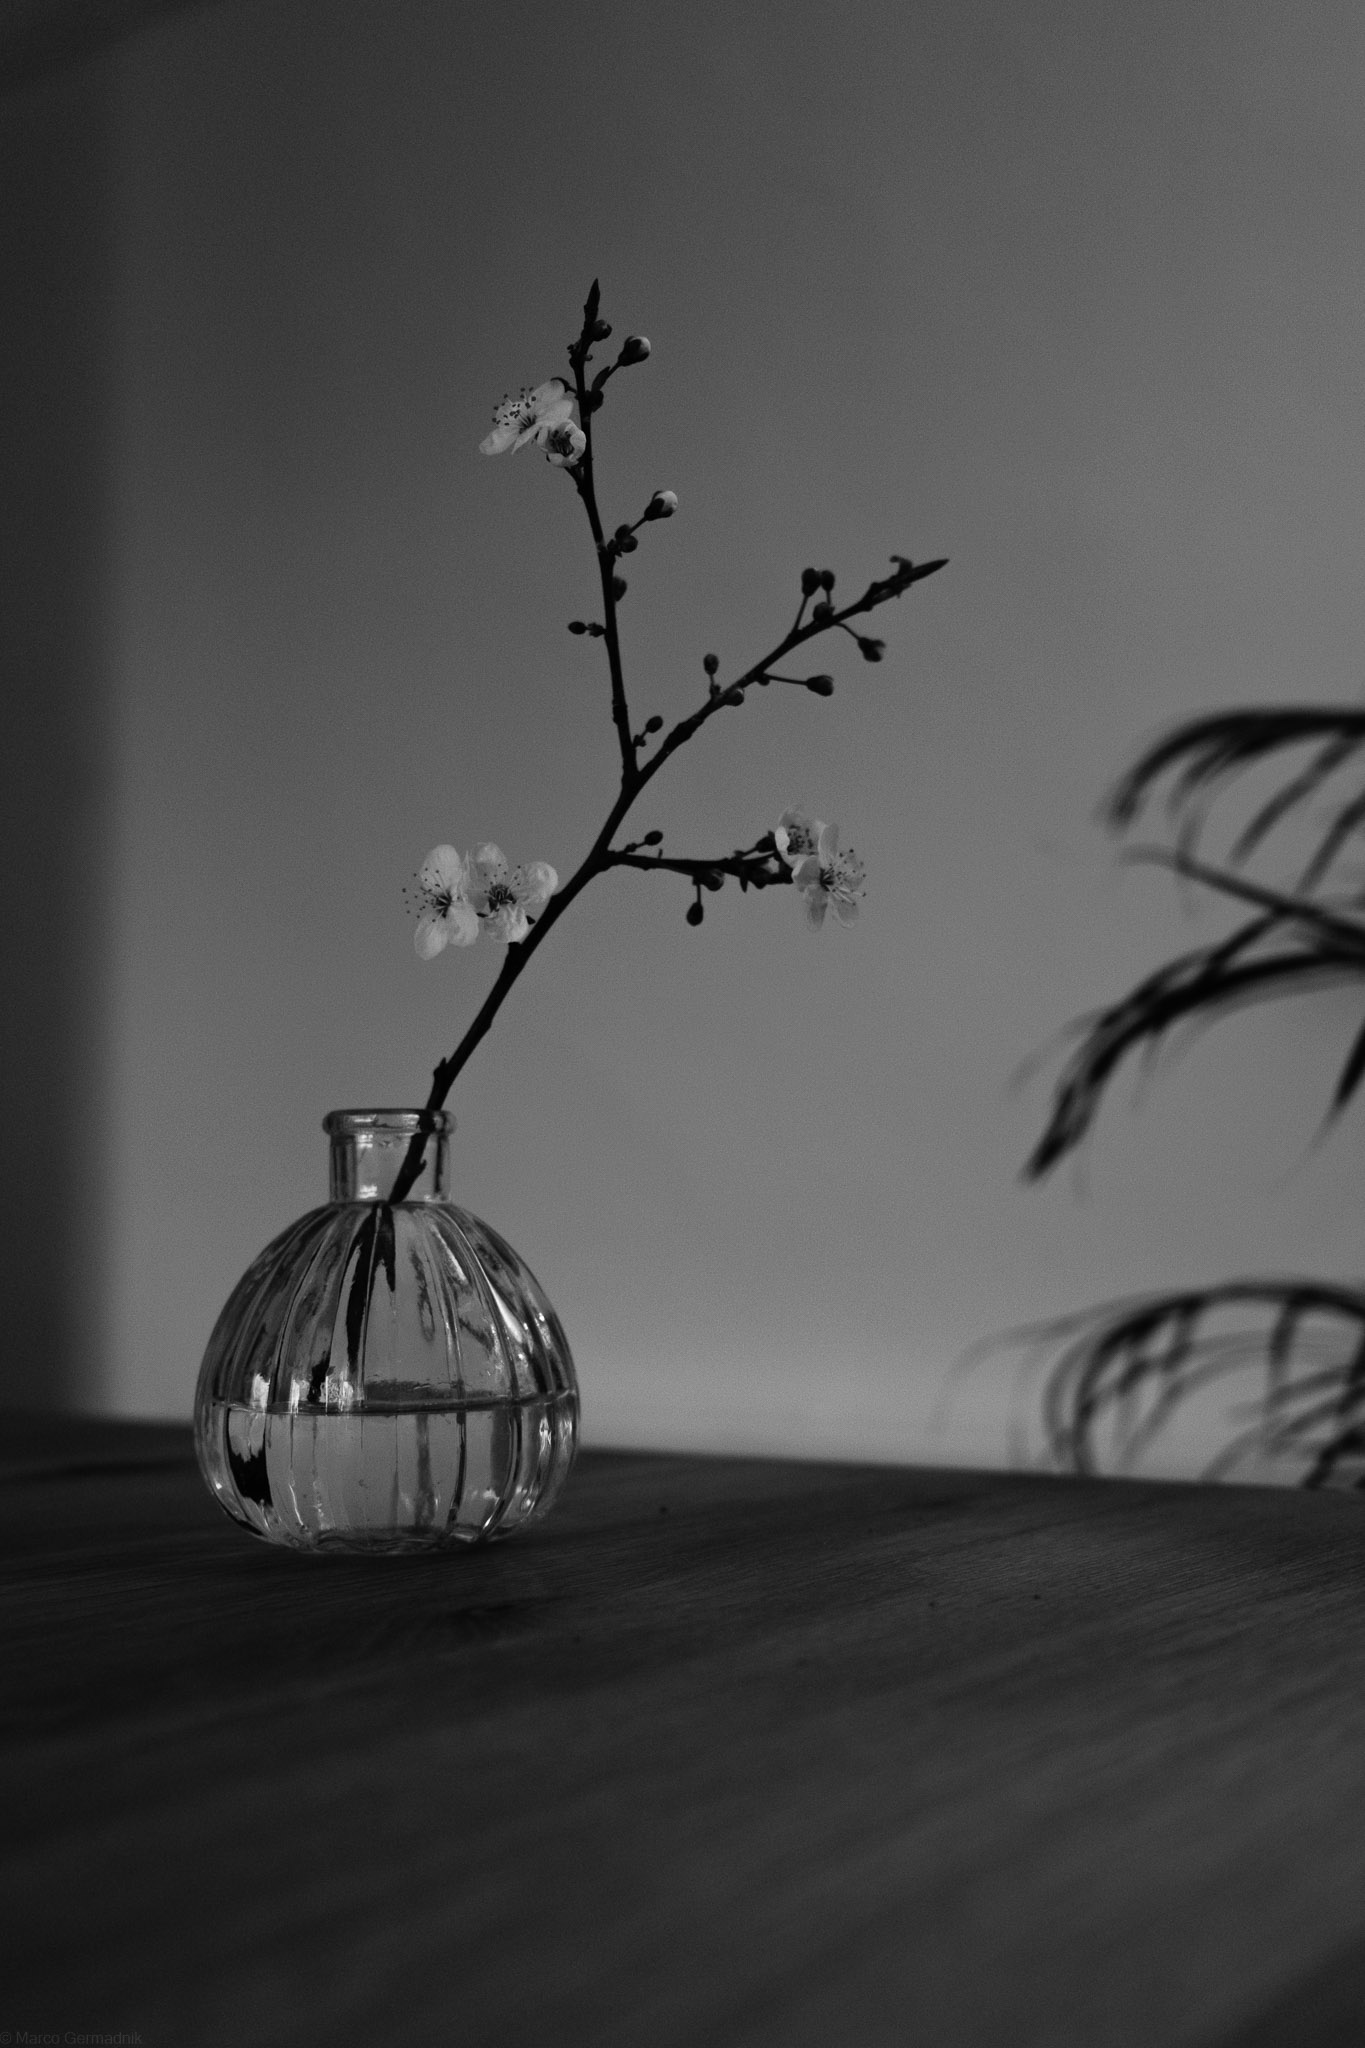 Branch of wild cherry tree in a vase on a table